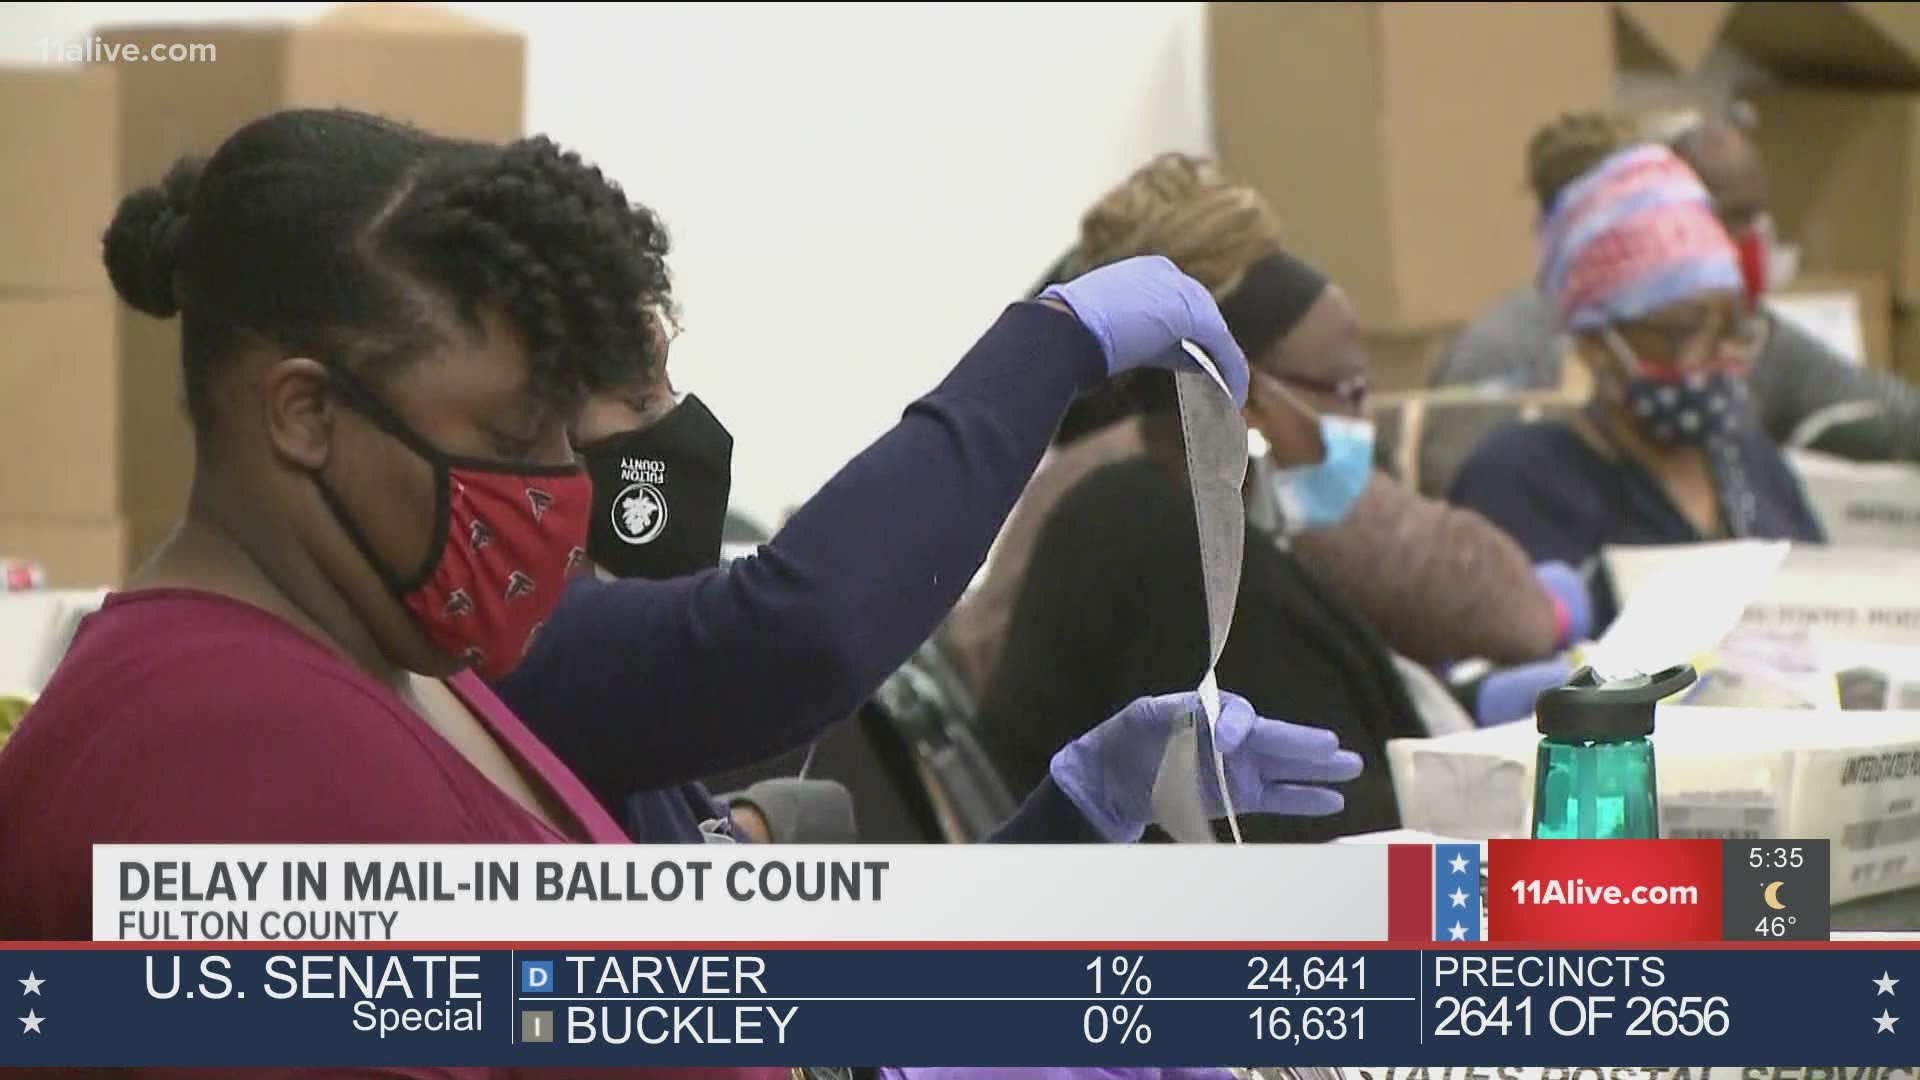 About 30,000 absentee ballots have yet to be counted.